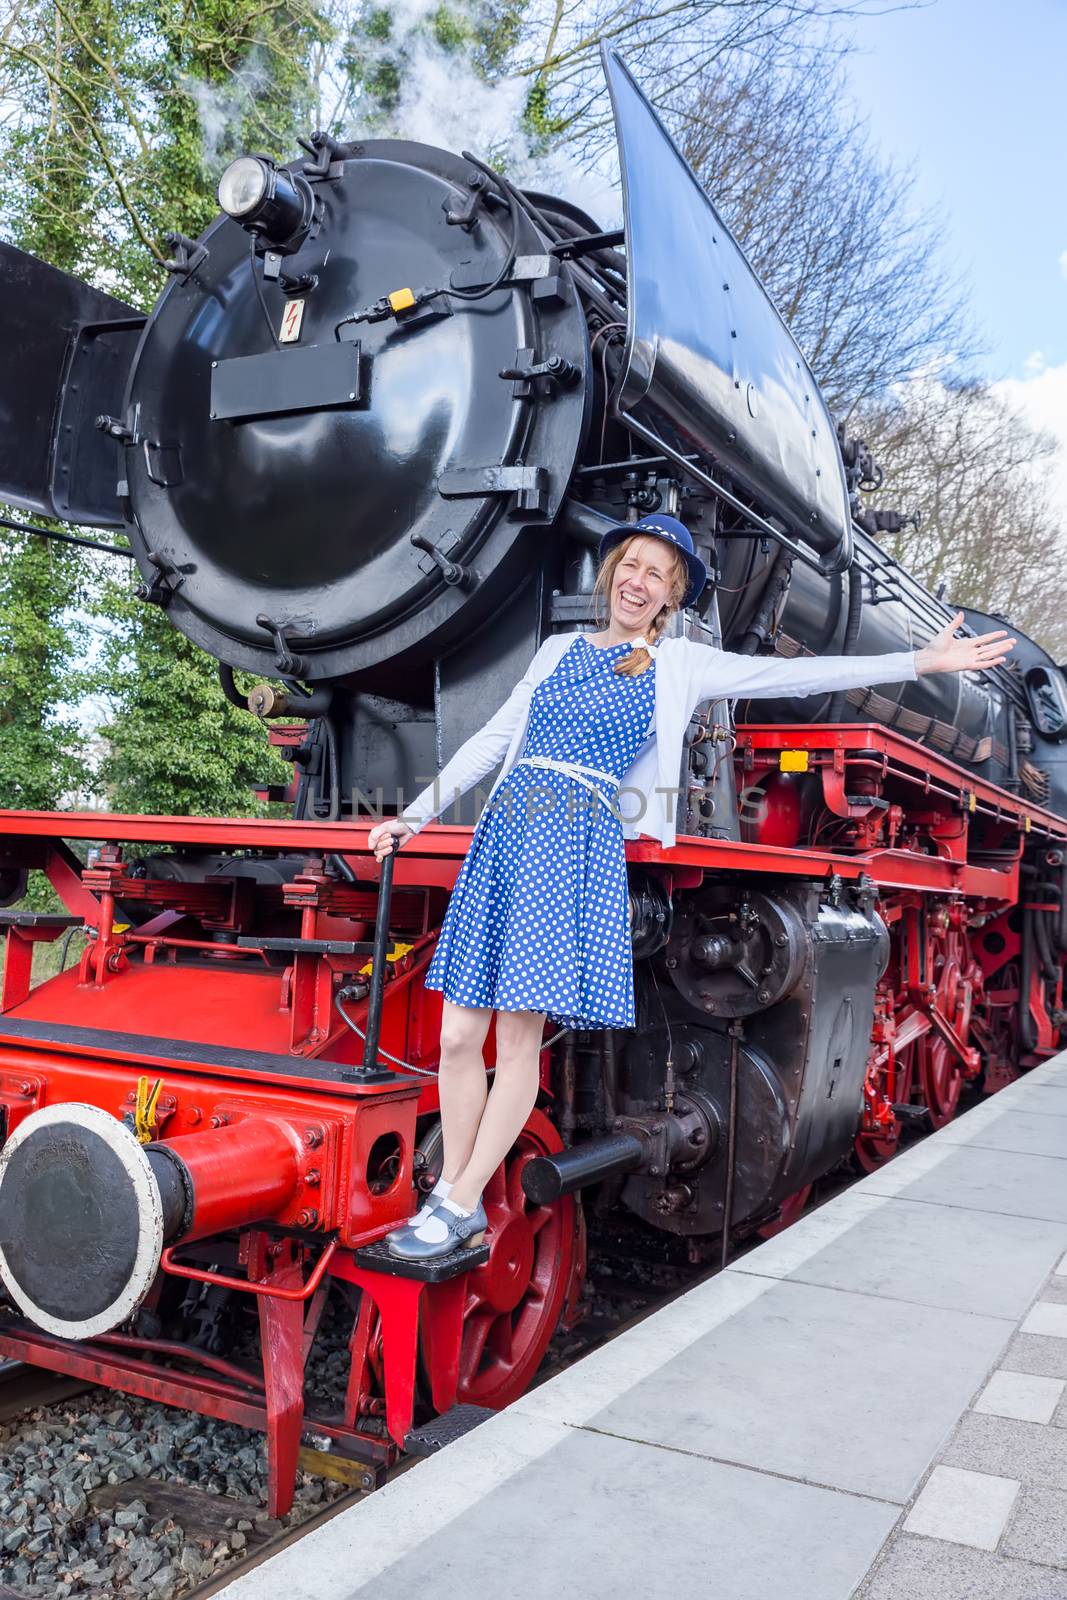 European middle aged woman expressing happiness for freedom and peace on steam train